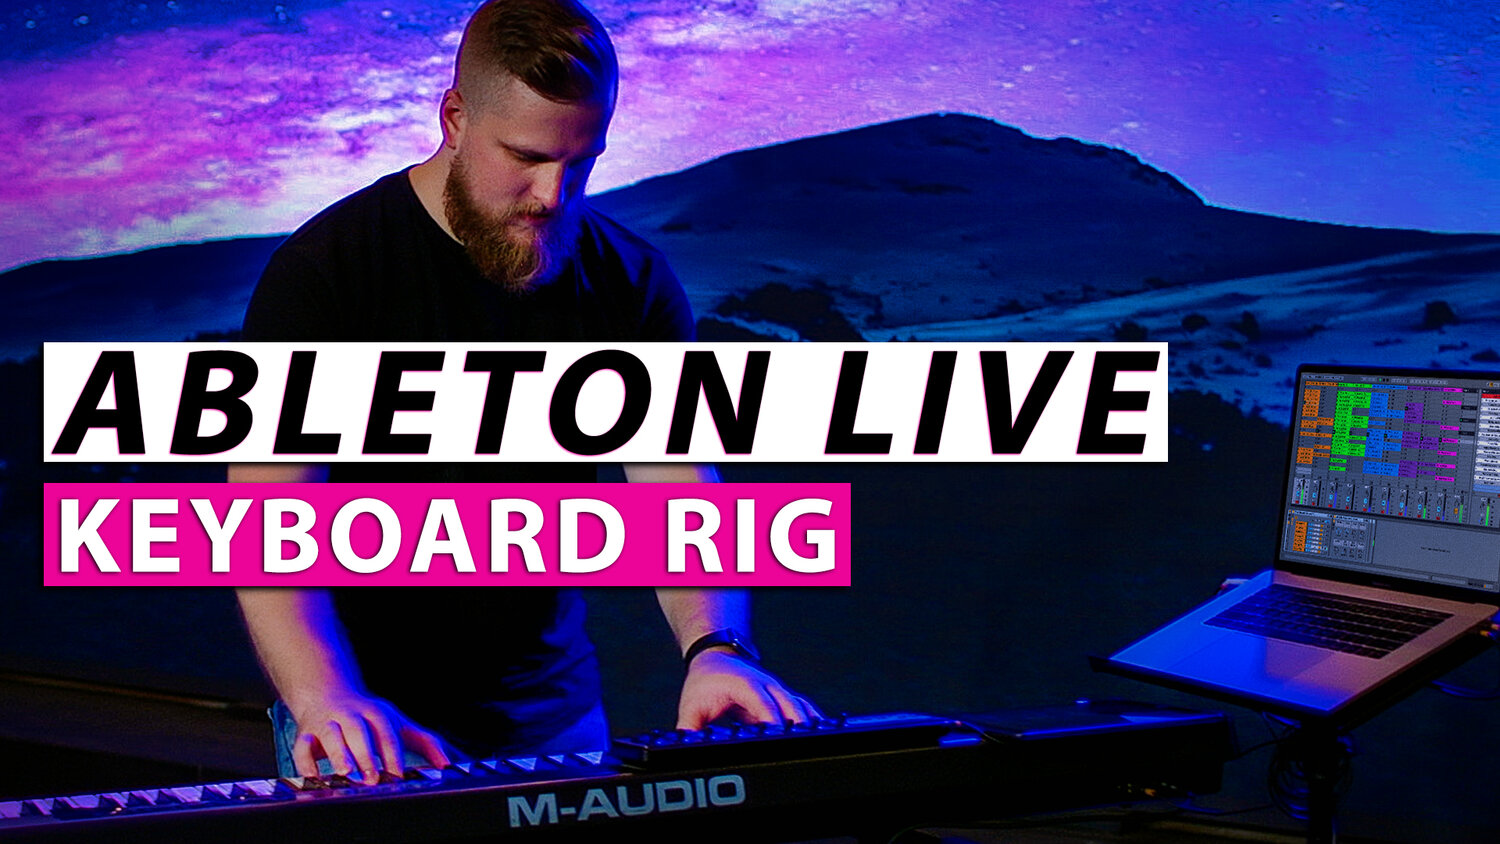 Ableton Live Keys Rig - Everything You Need to Know!